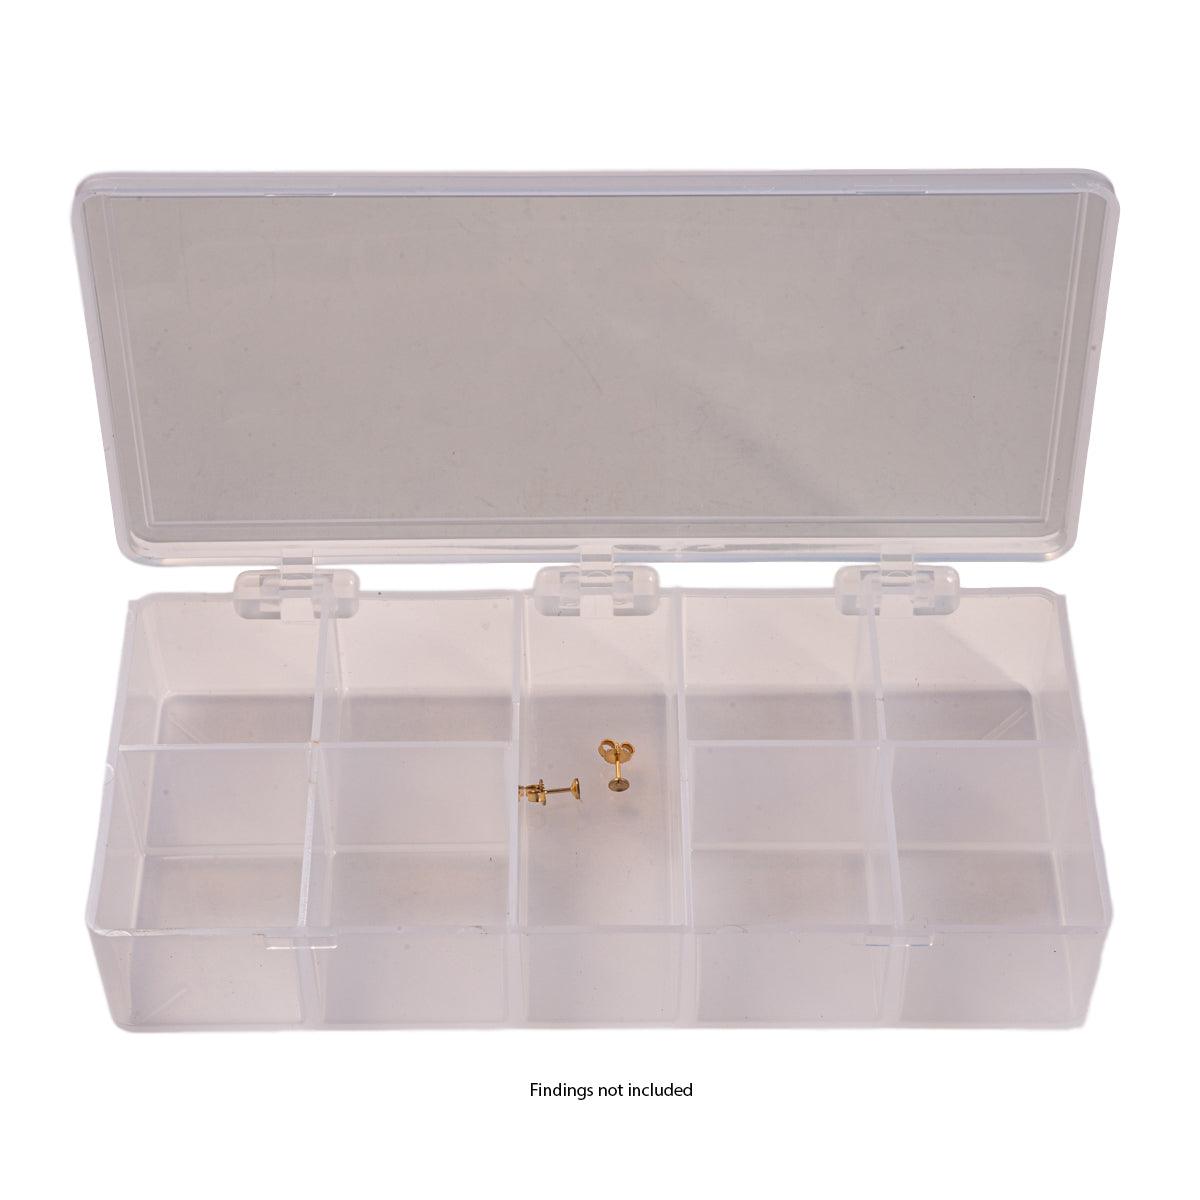 Plastic Storage Box with 9 Compartments-7 x 3-1/2 x 1-1/4